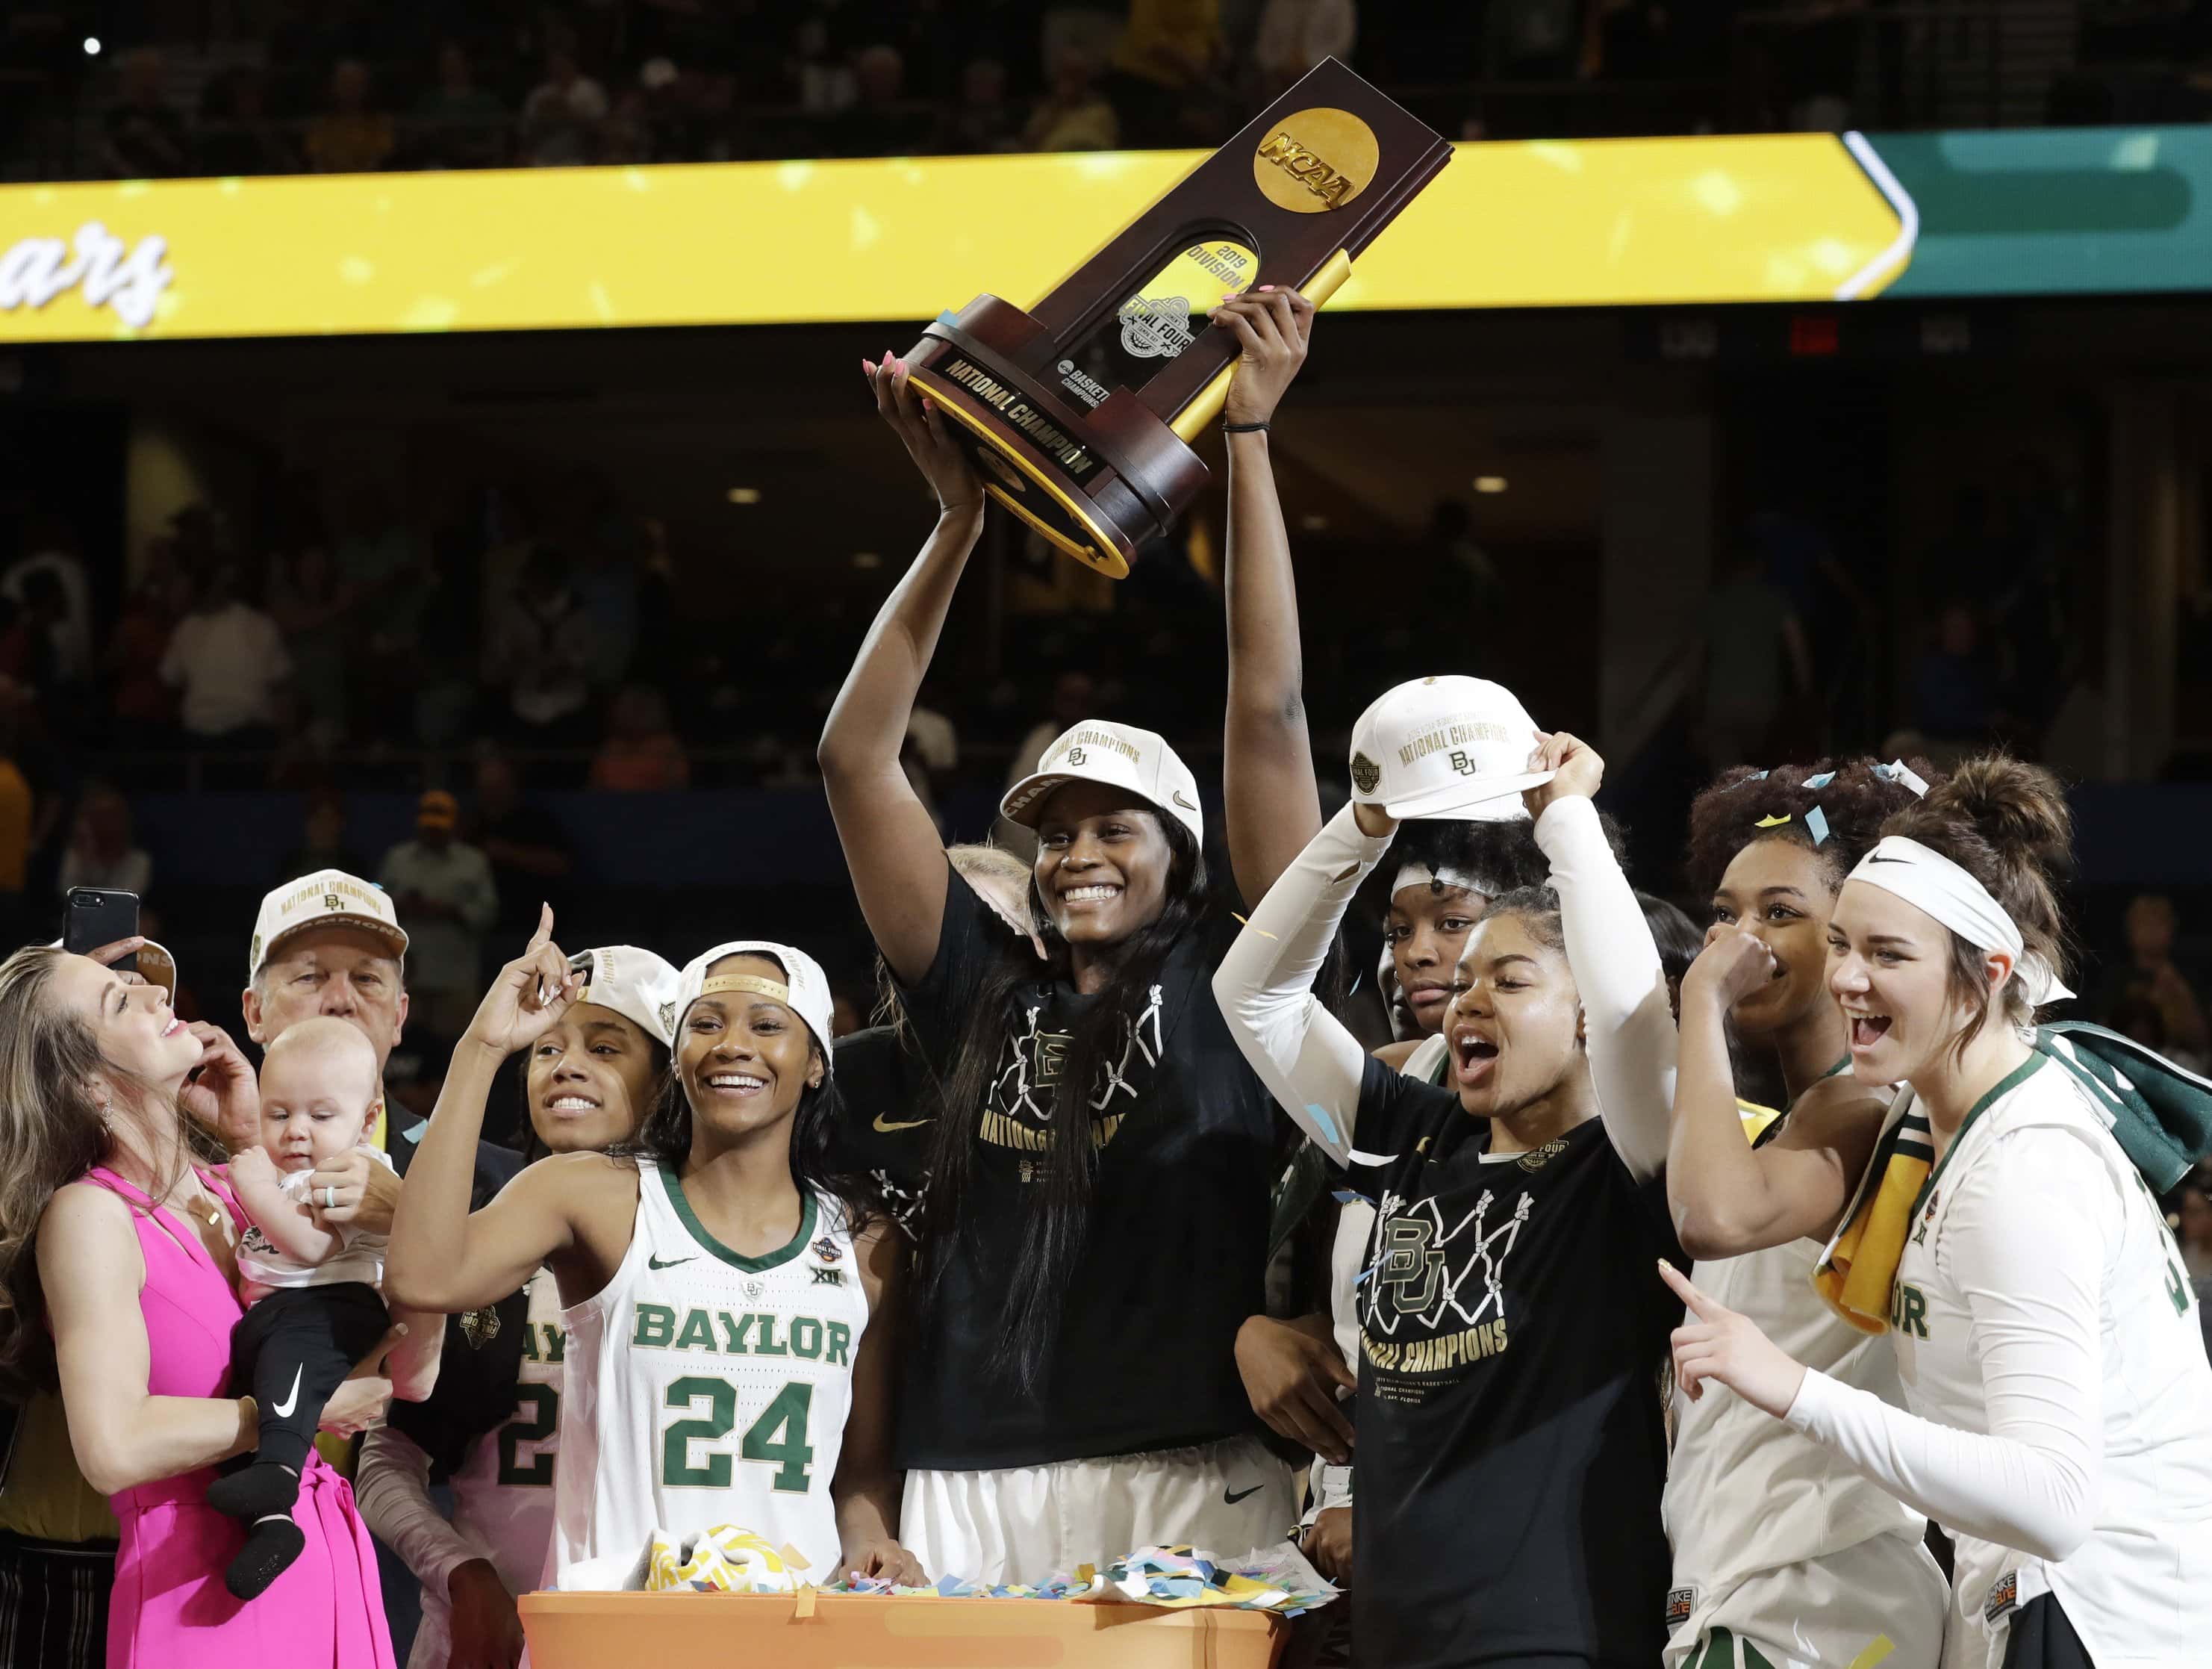 'We brought it home to you, Baylor Nation' — Lady Bears celebrate title